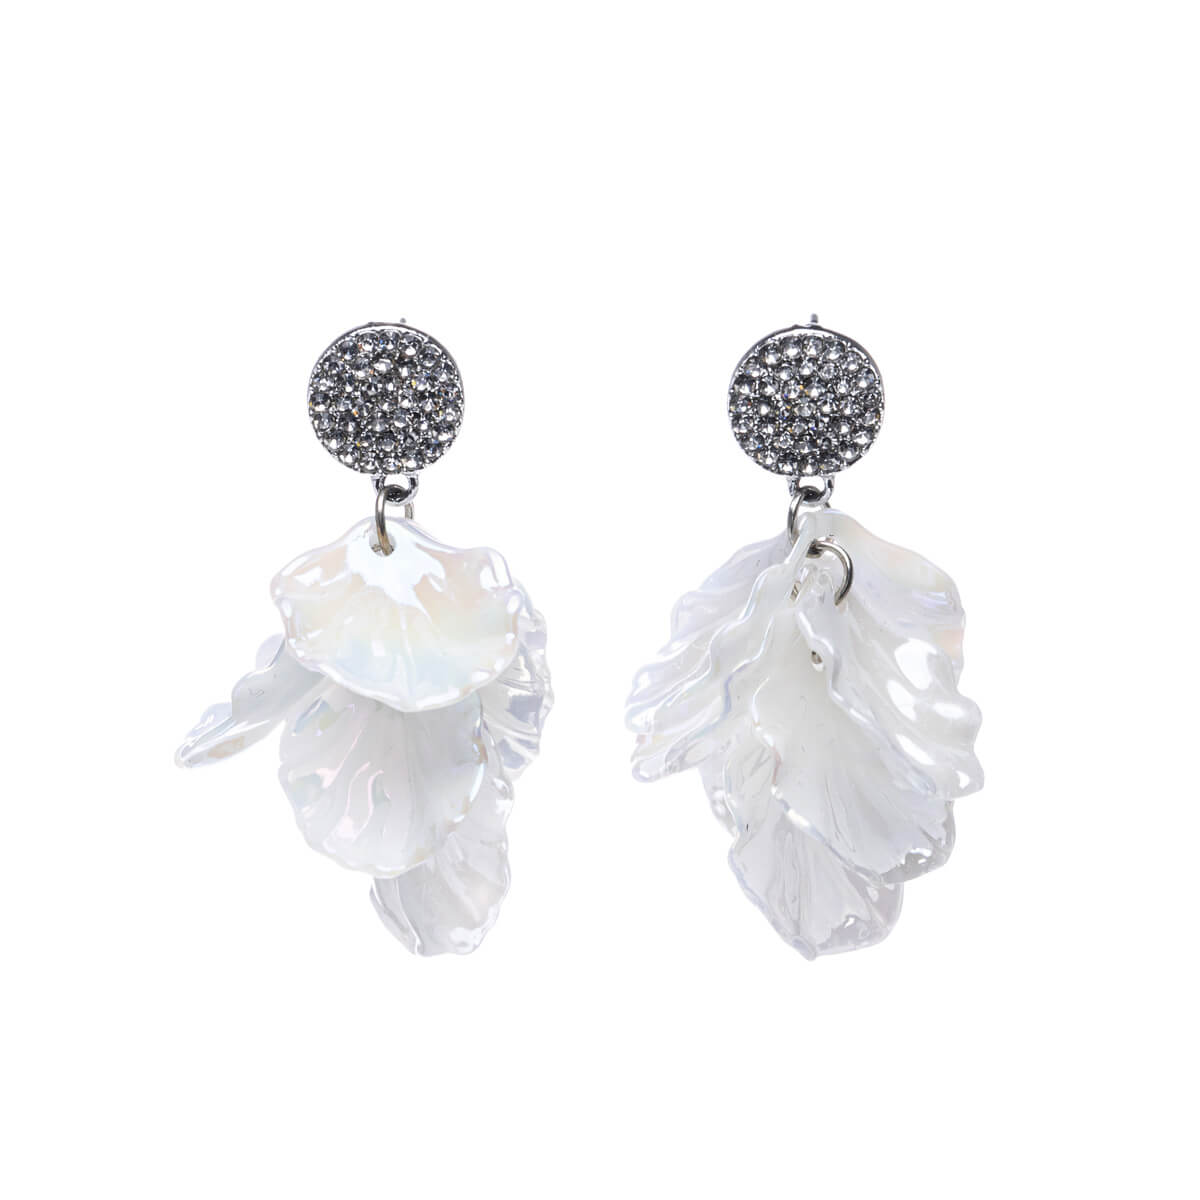 Pearl leaf earrings with clear glass stones